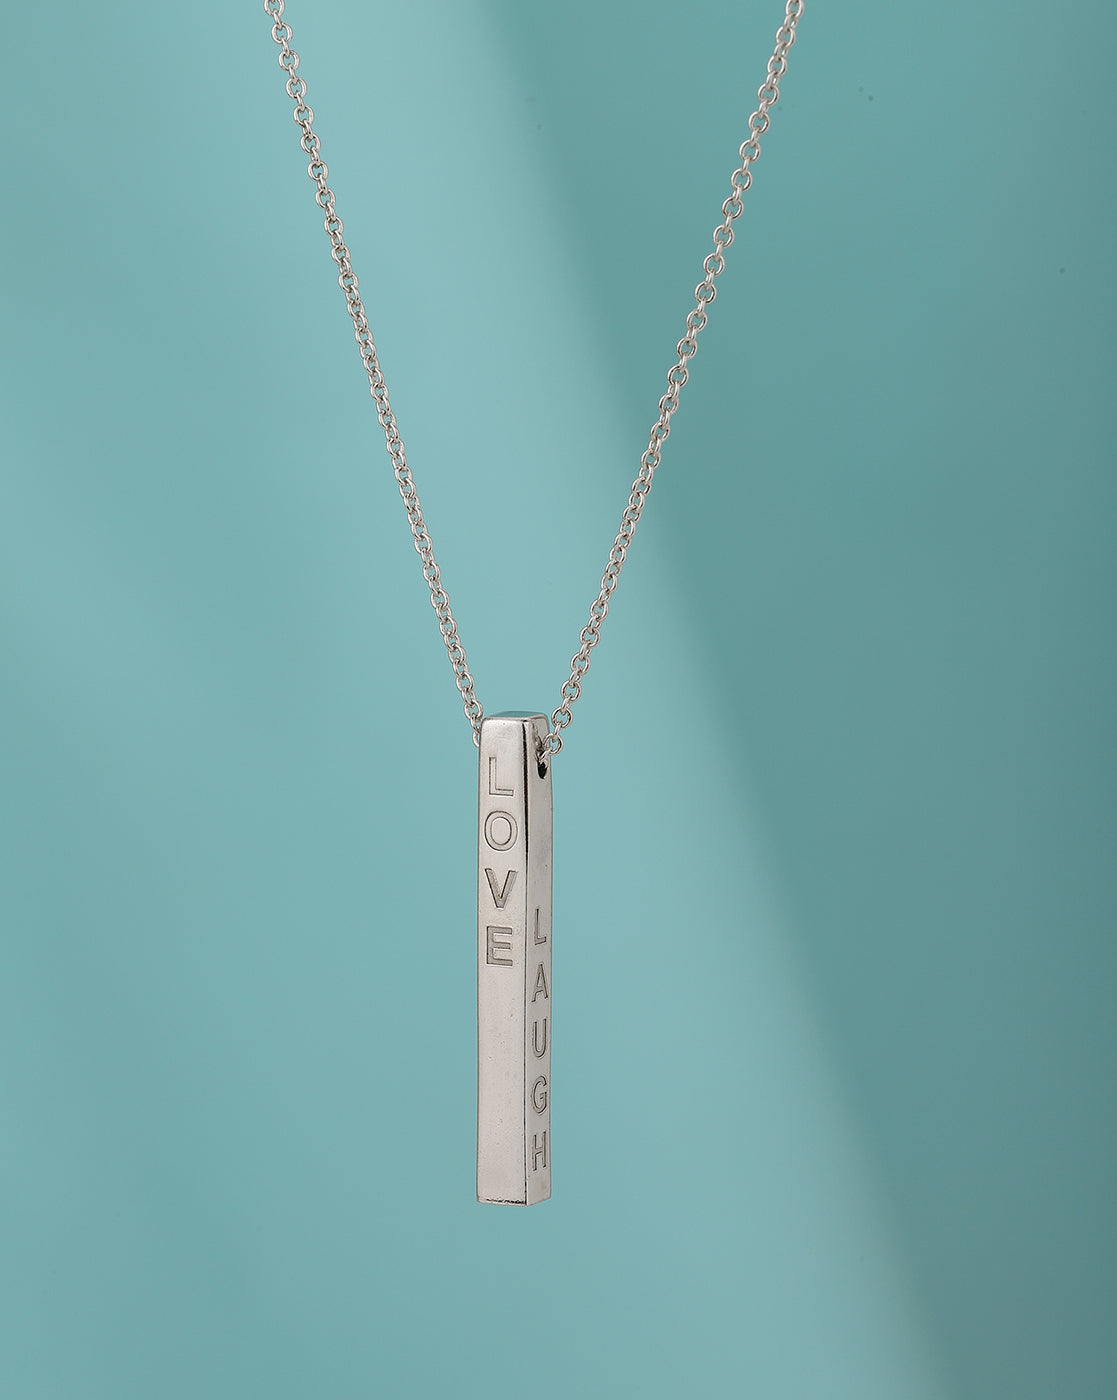 Carlton London Dangling Bar With Ingrave Text Pendant With Chain And Rhodium Plated